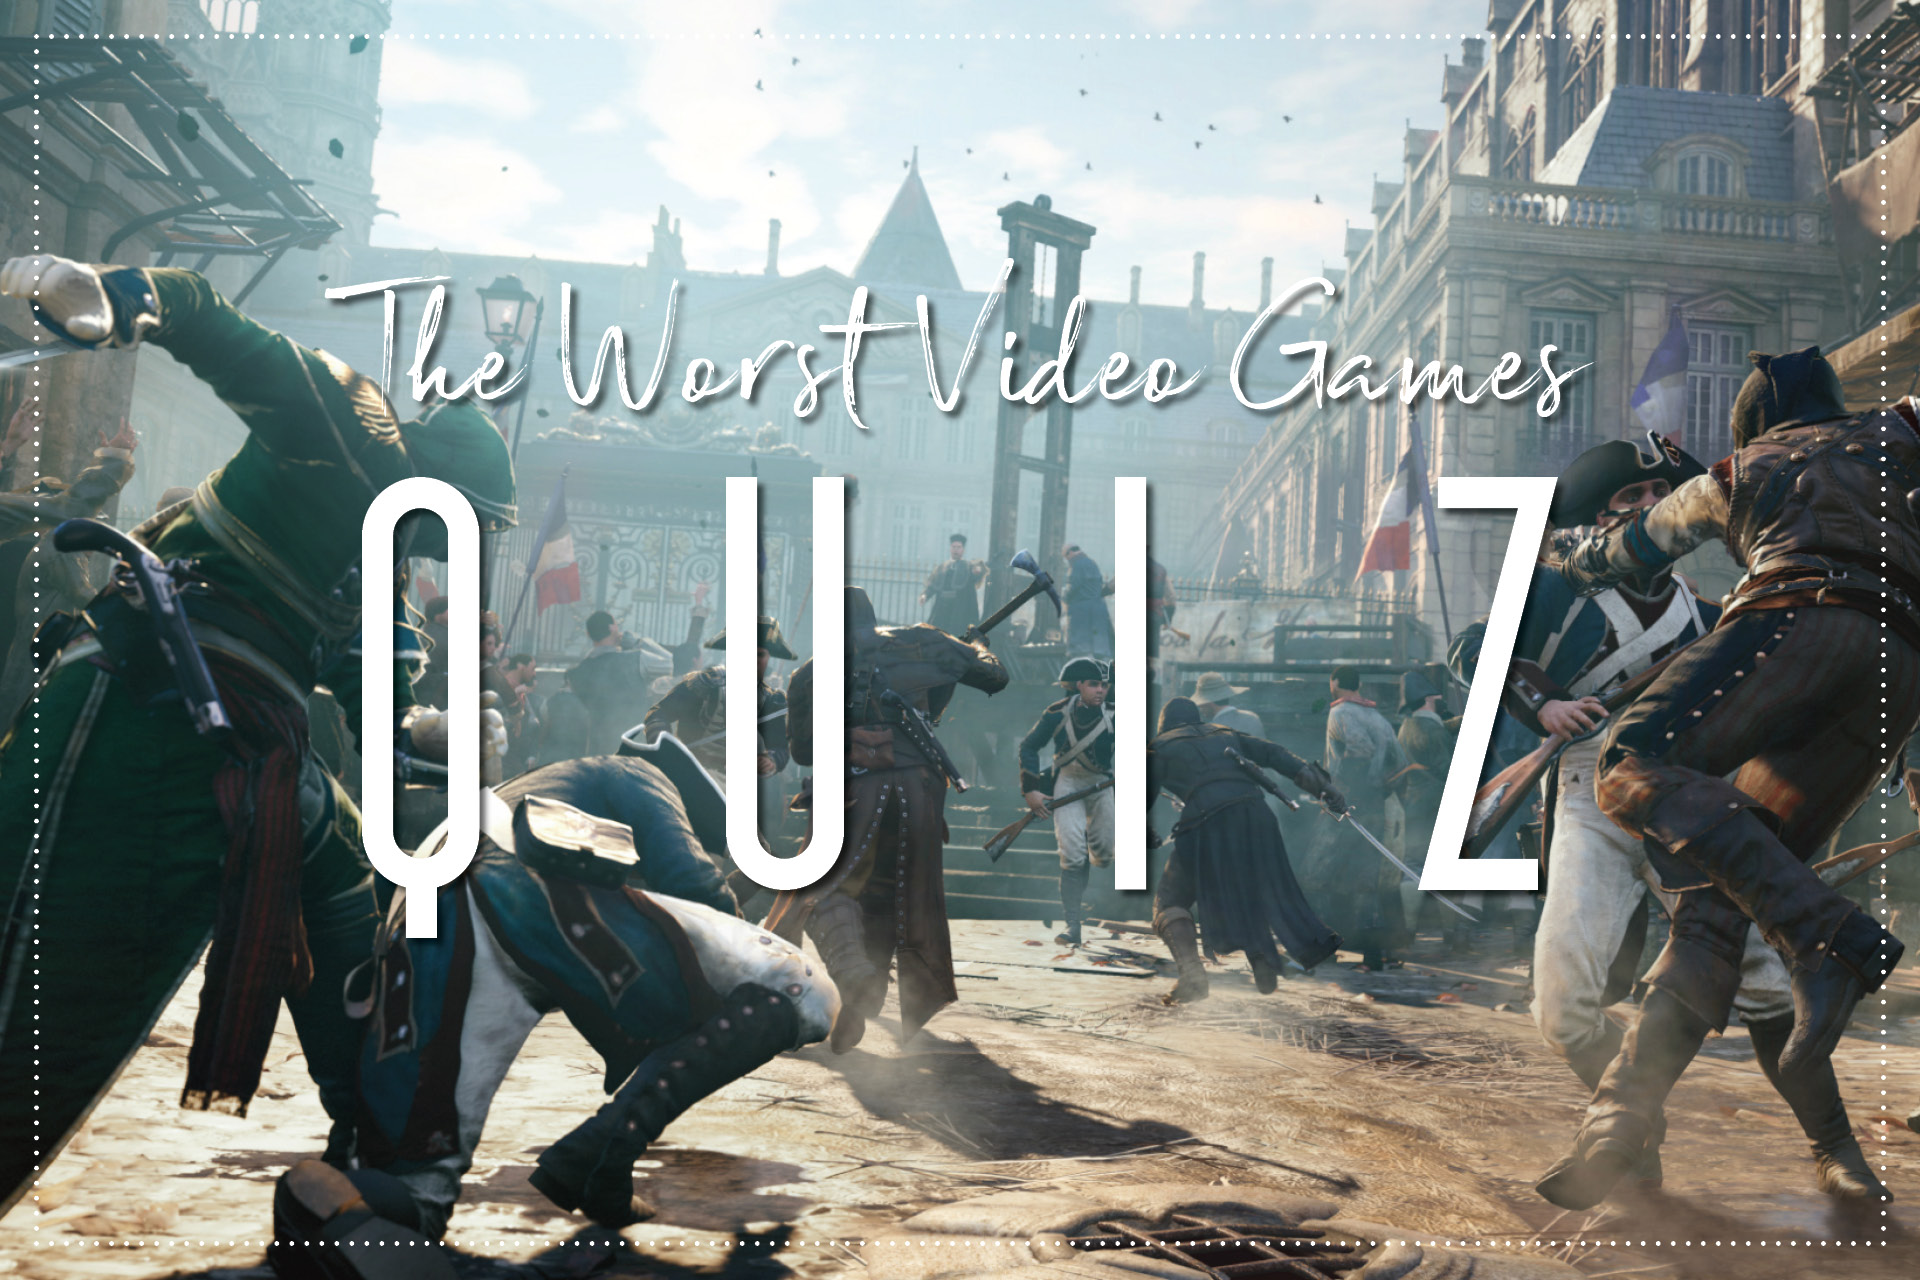 Quiz: The Worst Video Games of All Time